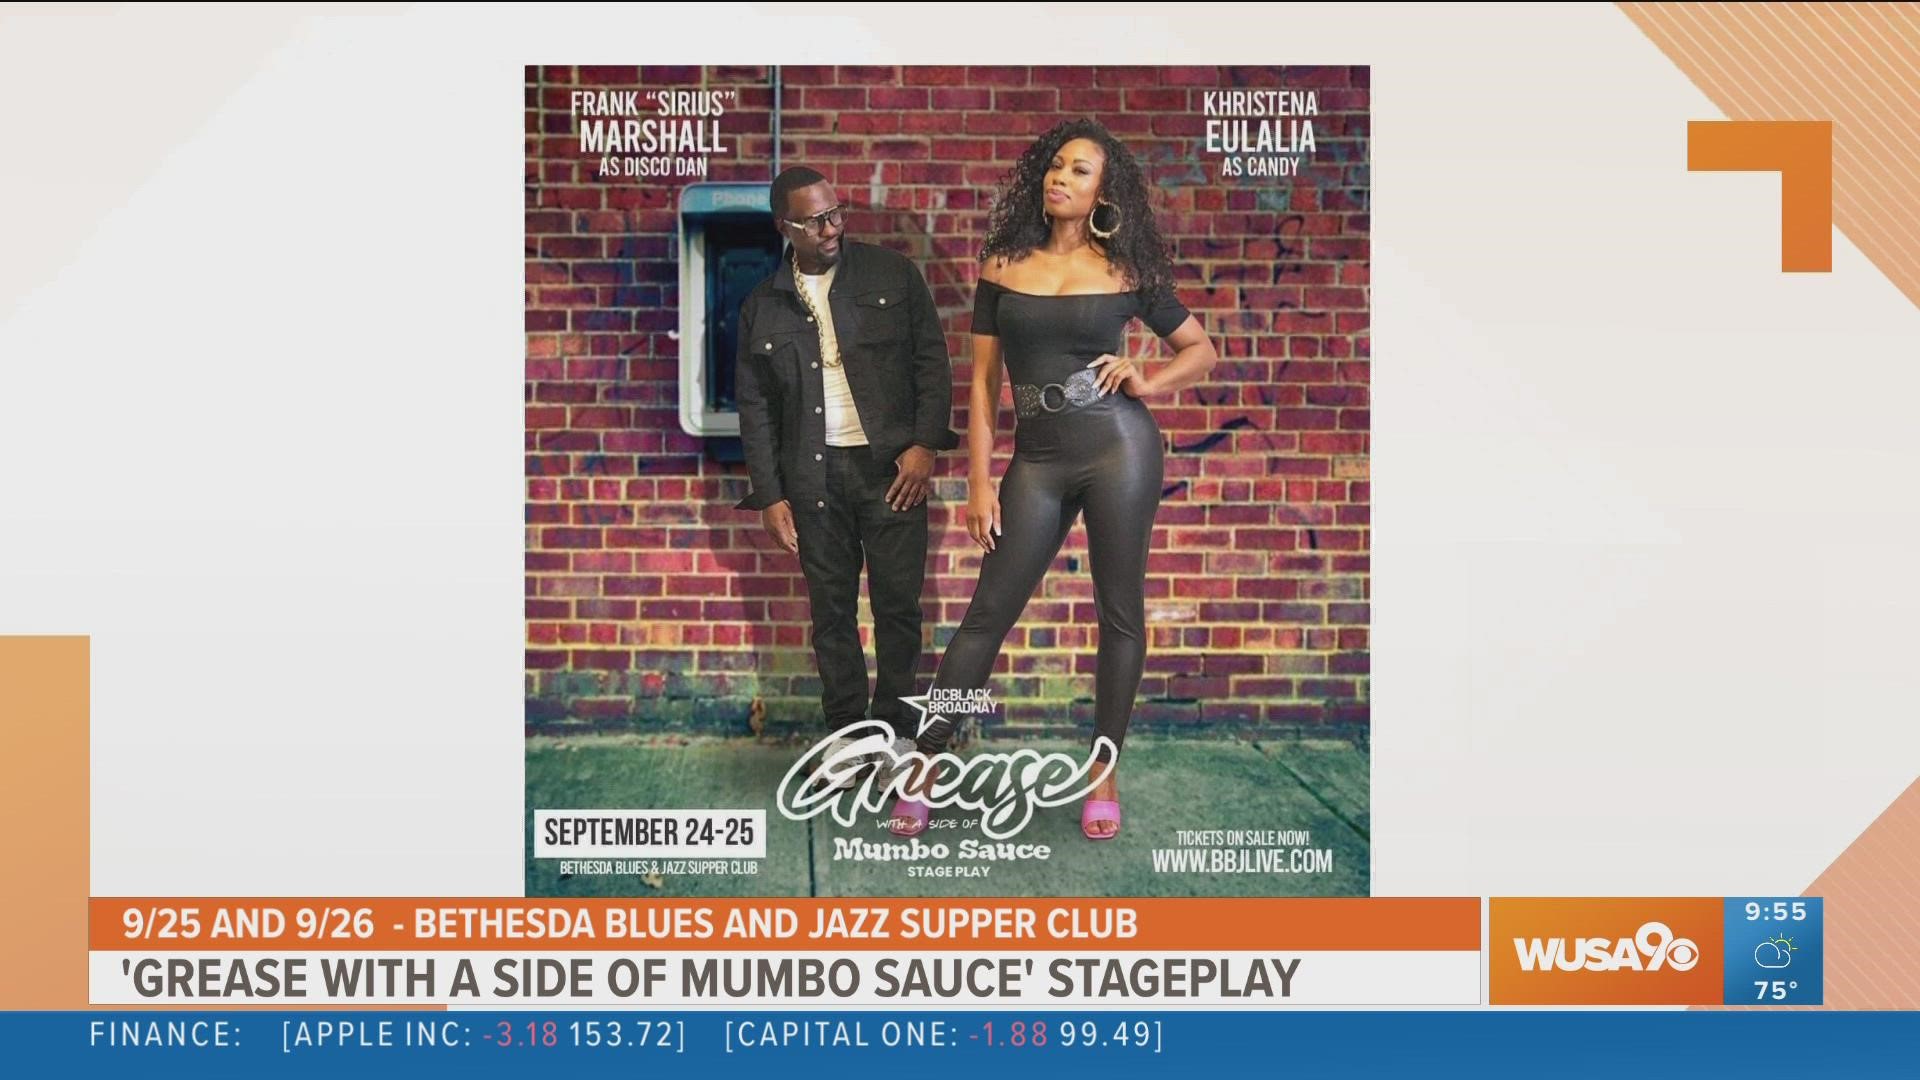 DC Black Broadway adds an encore performance of 'Grease with a side of Mumbo Sauce' at the Bethesda Blues and Jazz Supper Club Sunday, September 25th, 2022.